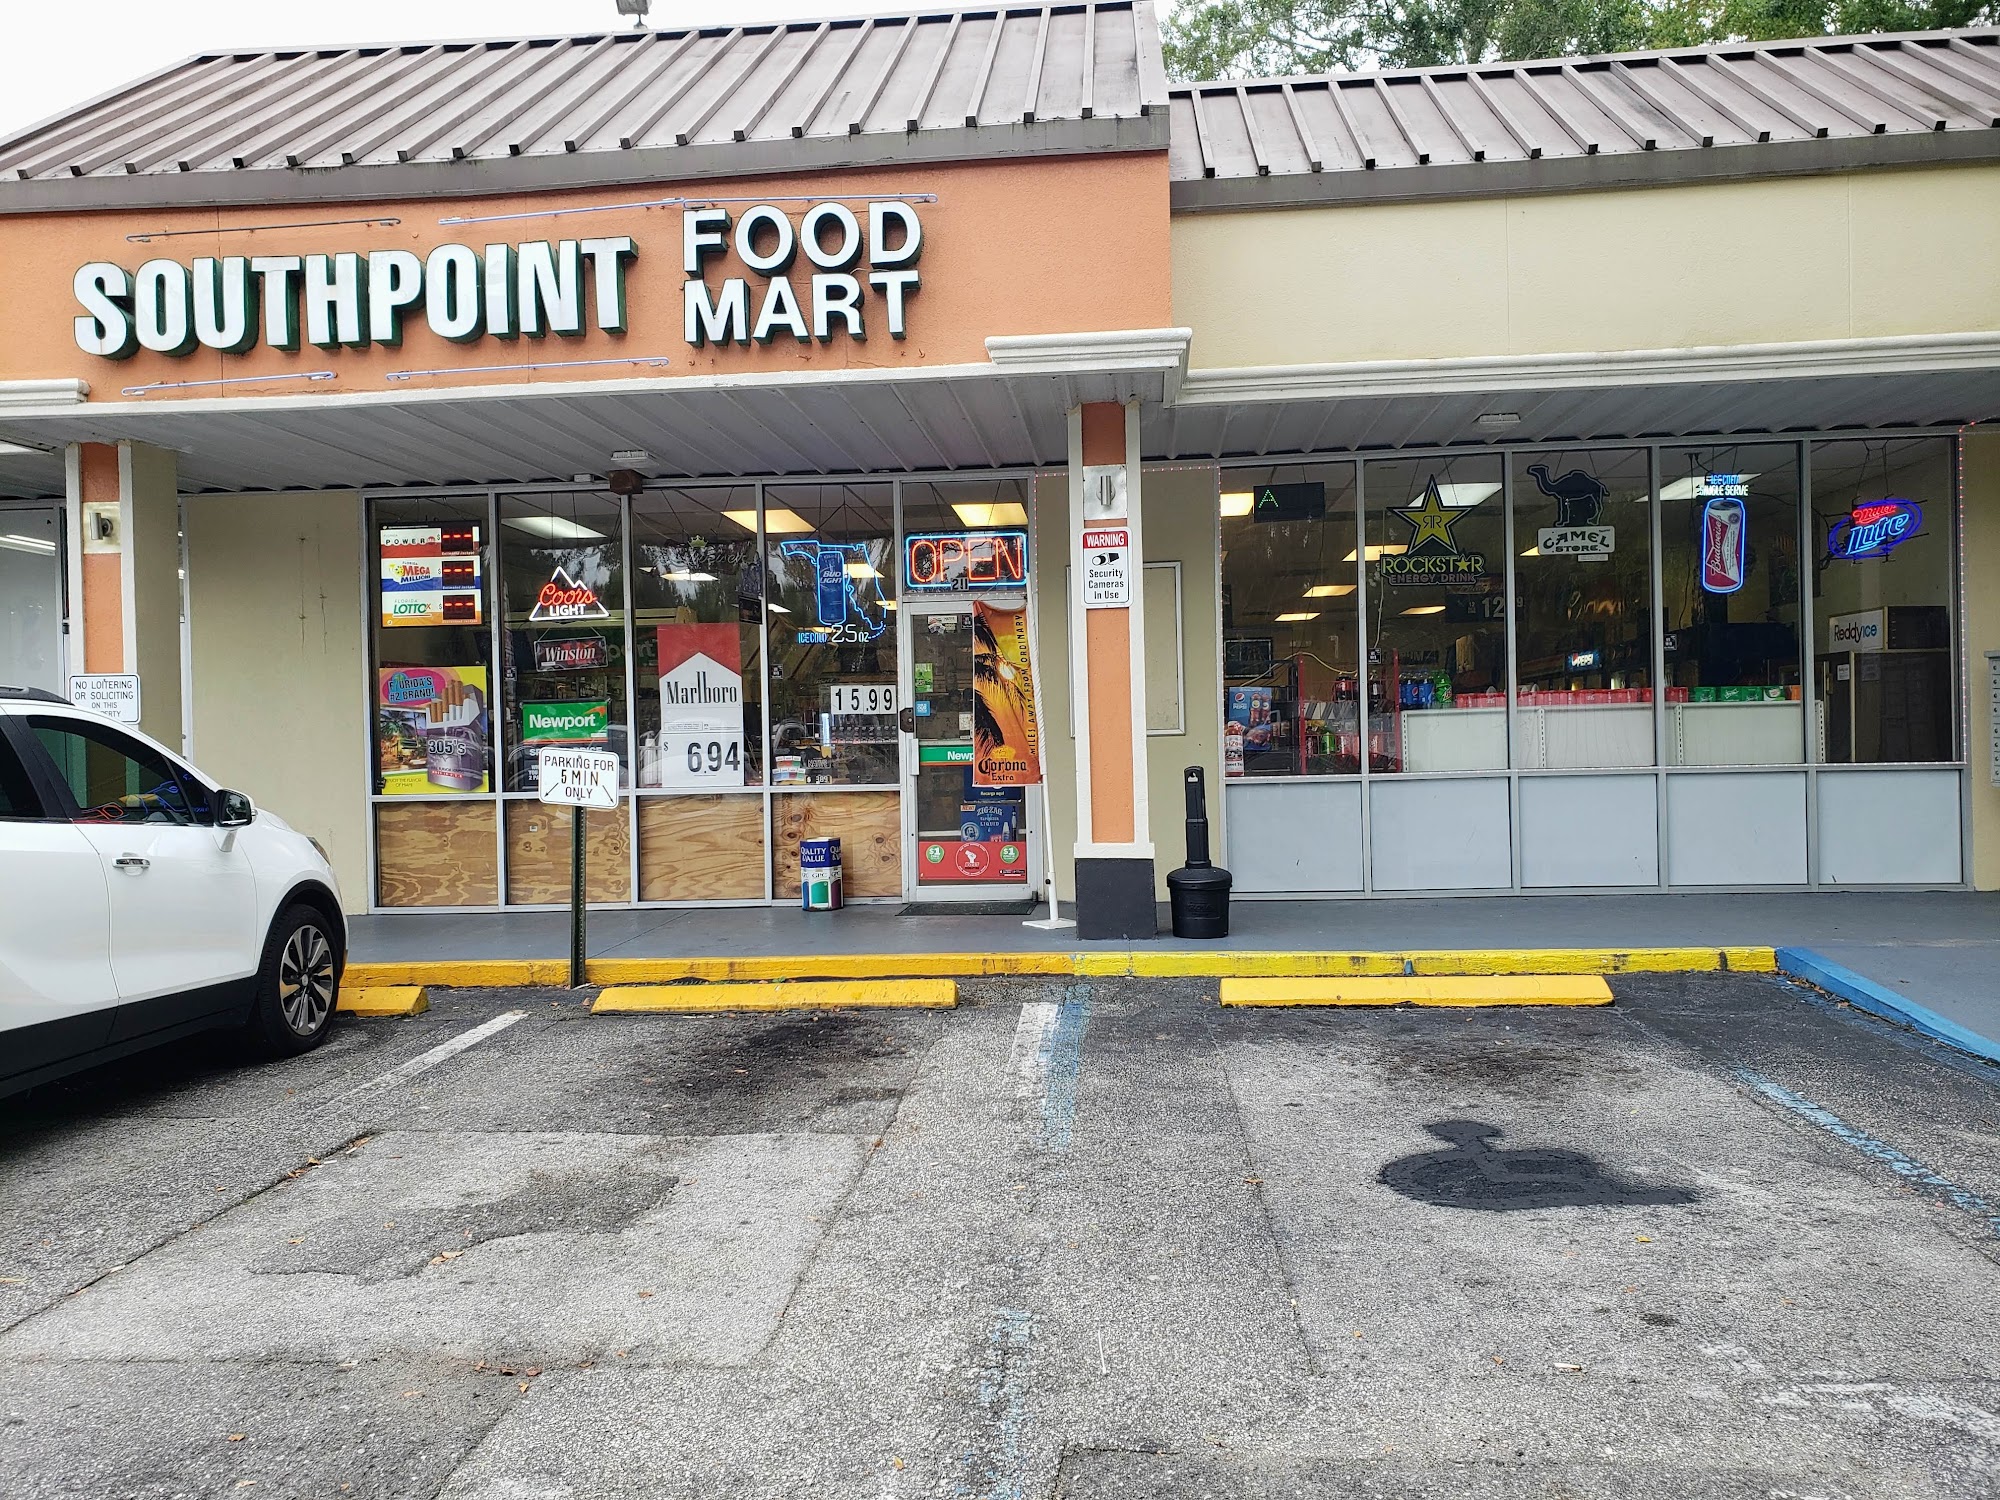 South point food mart